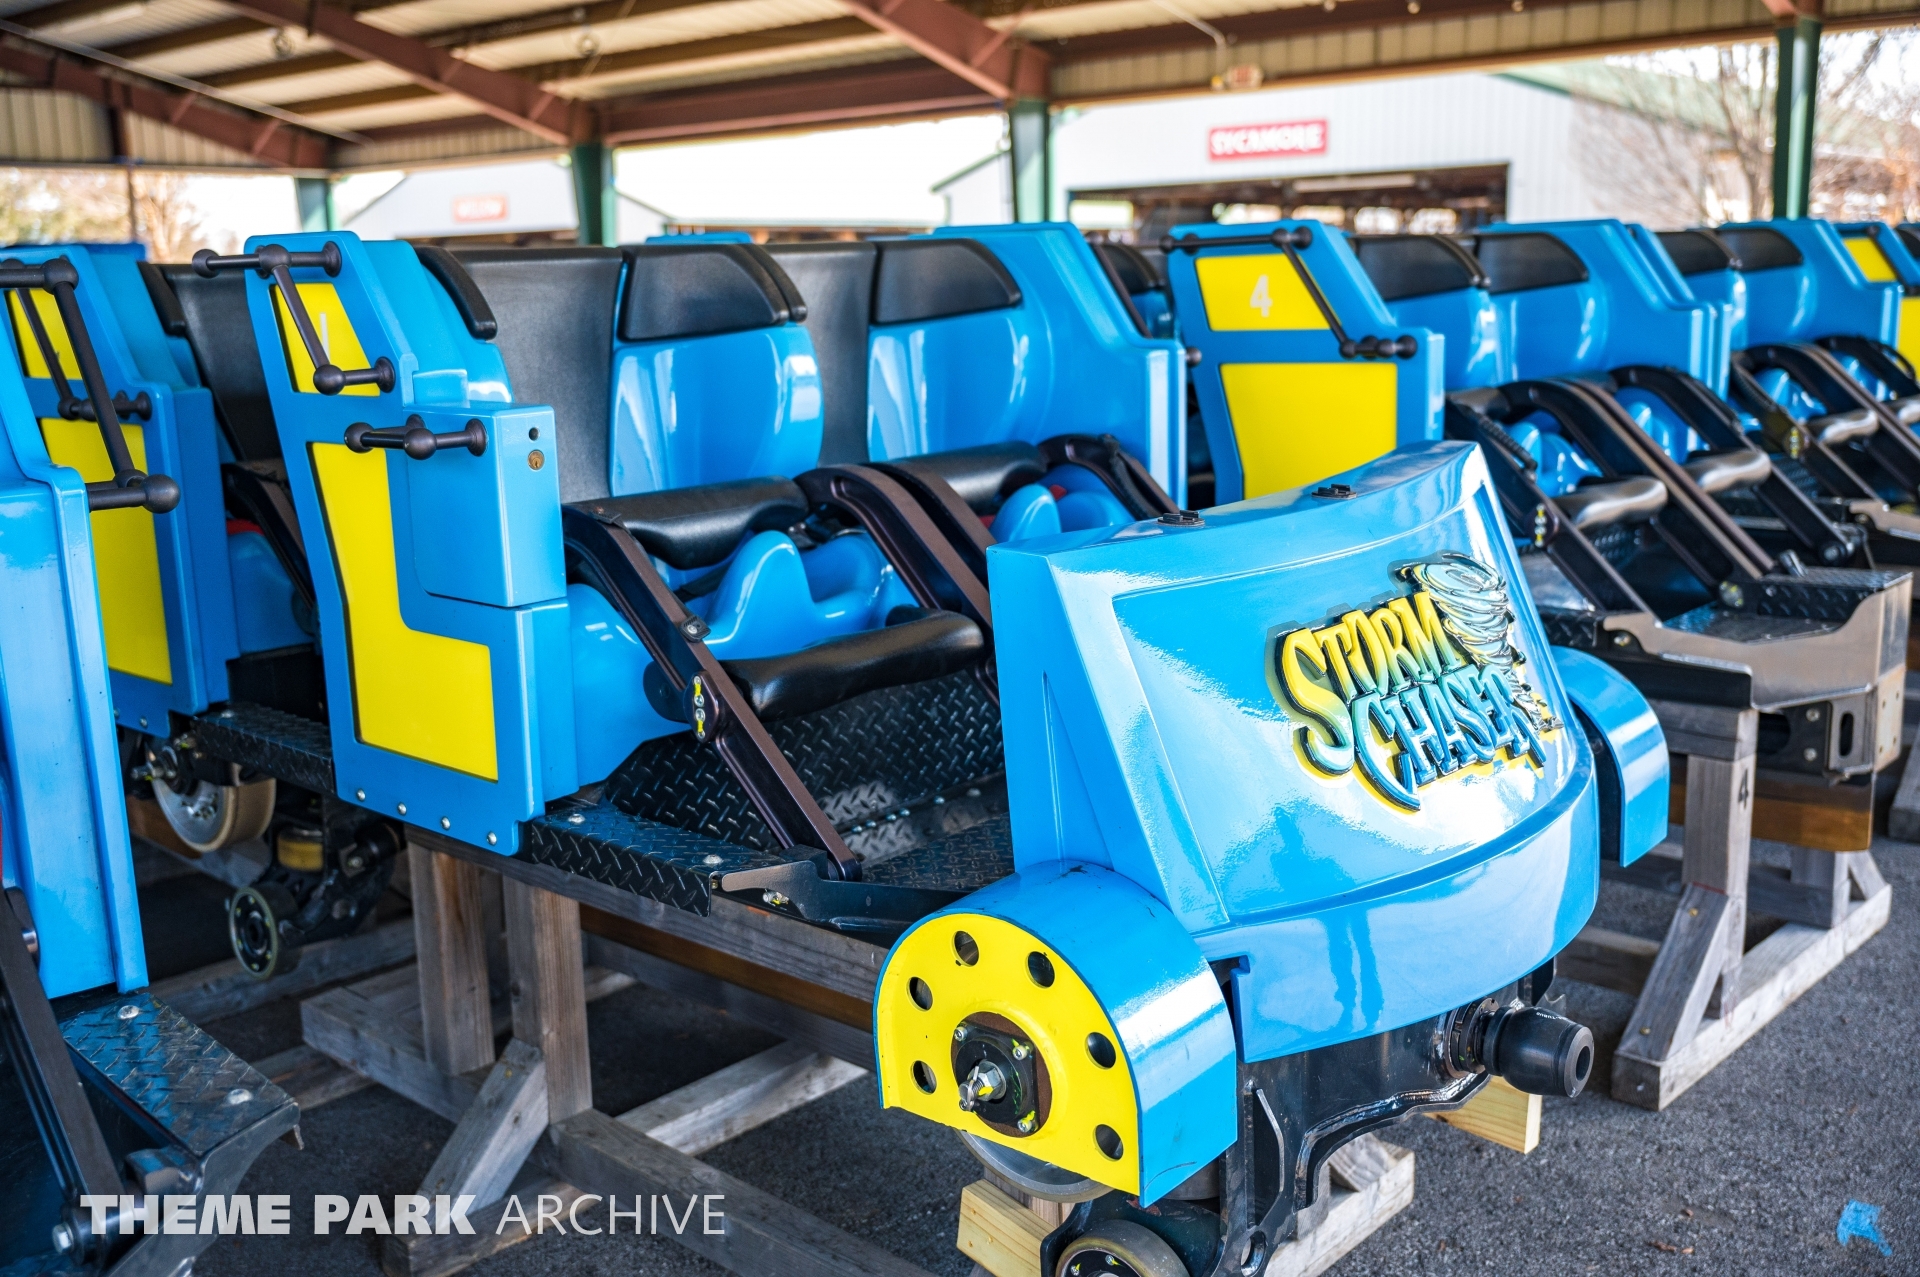 Storm Chaser at Kentucky Kingdom | Theme Park Archive